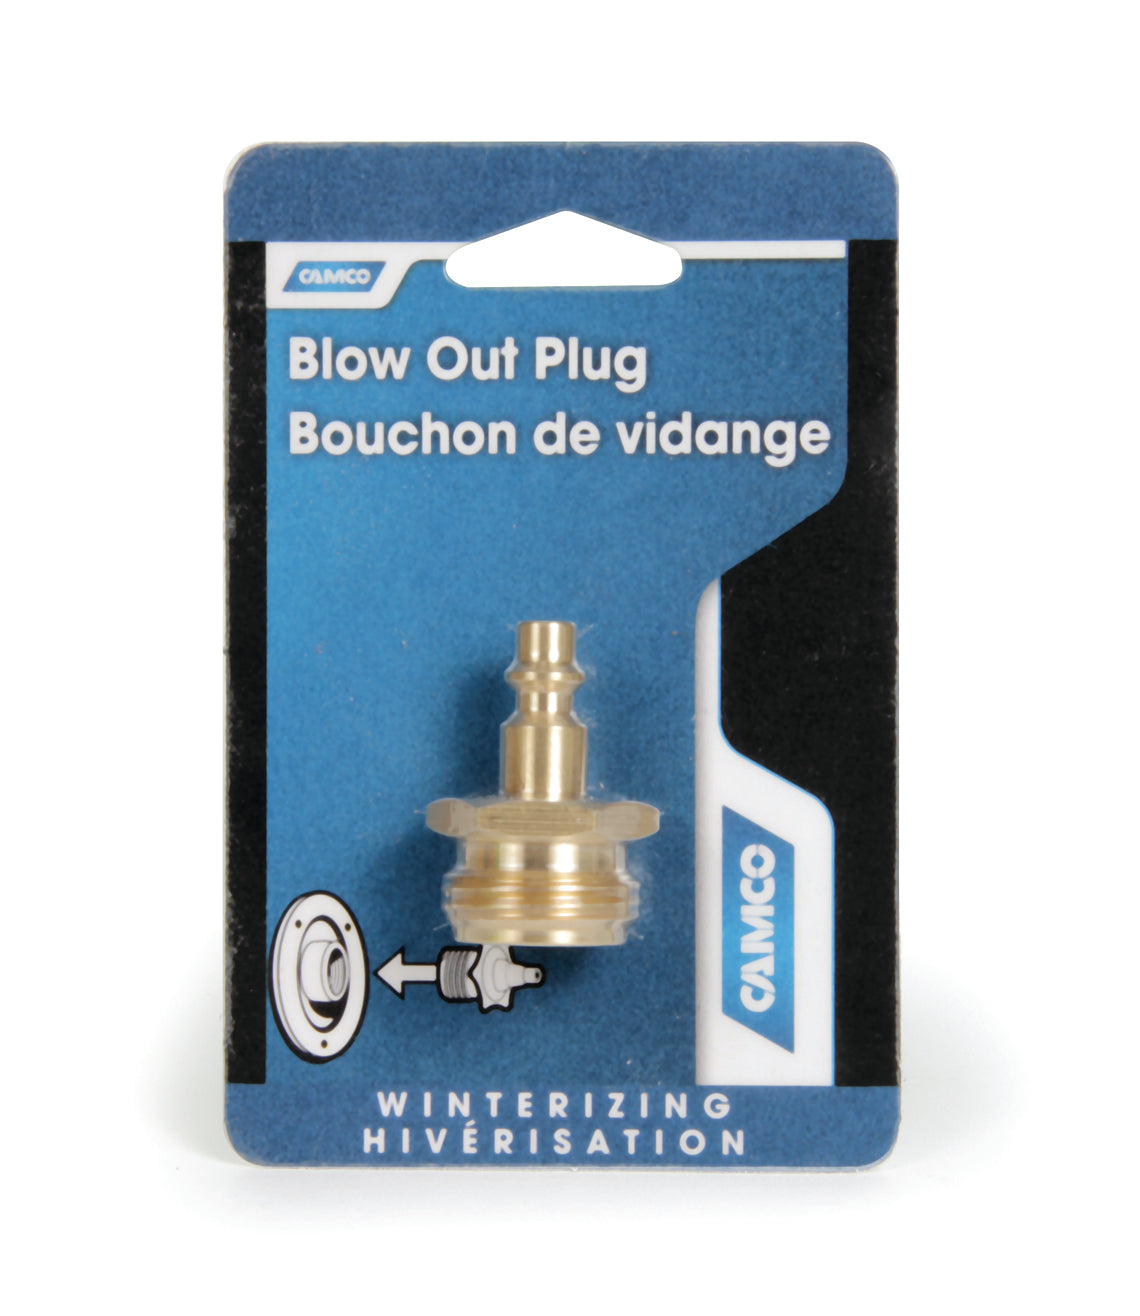 Camco Blow Out Plug  Quick Conn